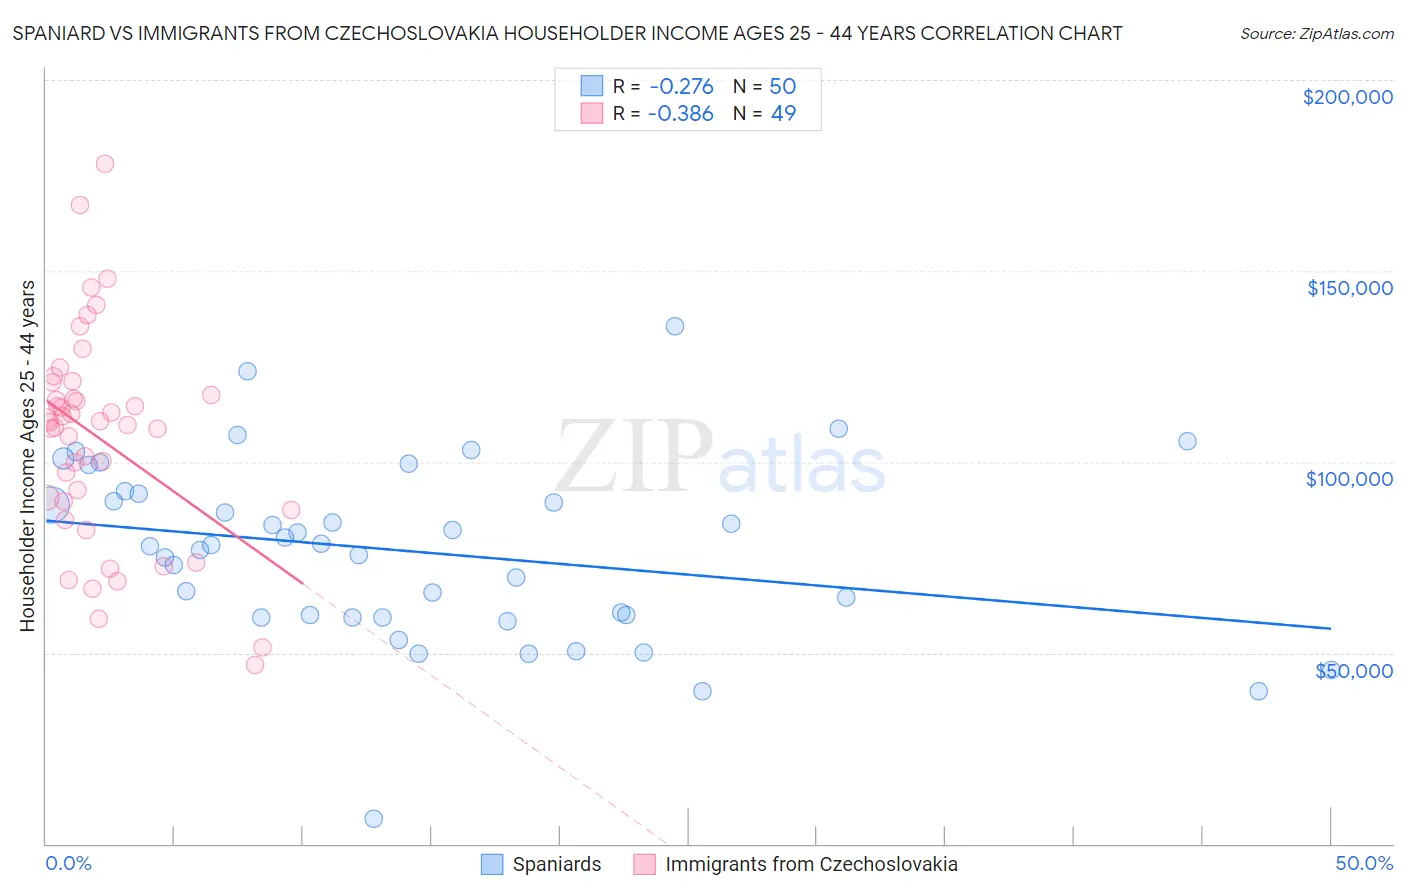 Spaniard vs Immigrants from Czechoslovakia Householder Income Ages 25 - 44 years